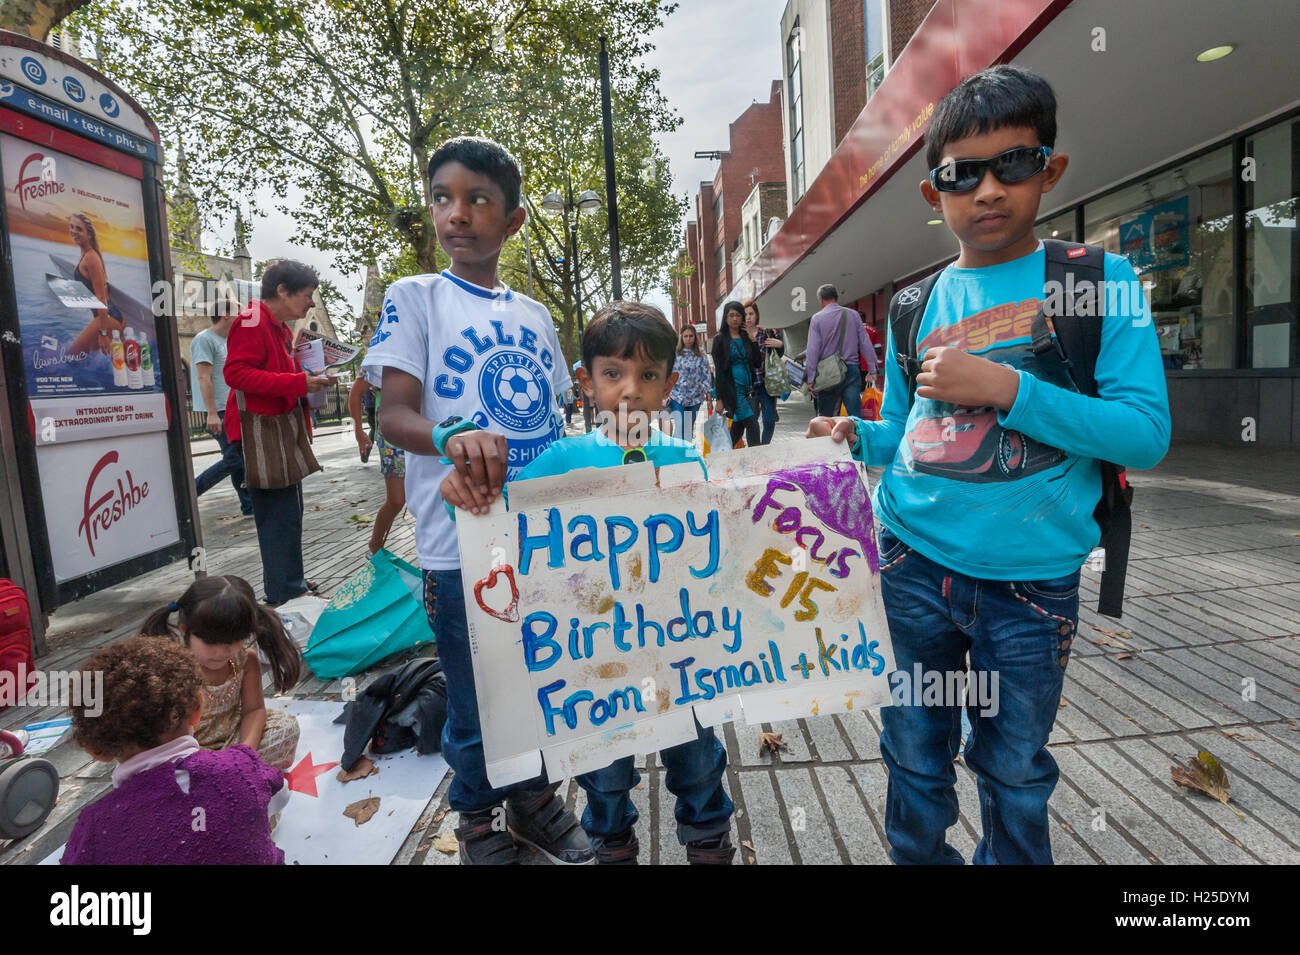 London, UK. 24th September 2016. 'Ismail's kids' arrive holding a poster they have just made for the party at the weekly street stall on Stratford Broadway to celebrate the third anniversary of the fight against Newham Council after 29 young mothers stood together to fight against their eviction from the Focus E15 hostel, refusing to accept being moved out of London, cut off from families and communities and demanding to be allowed to continue to live in the area they knew as home. Ismail's family were supported by Focus E15 when evicted. Peter Marshall/Alamy Live News Stock Photo